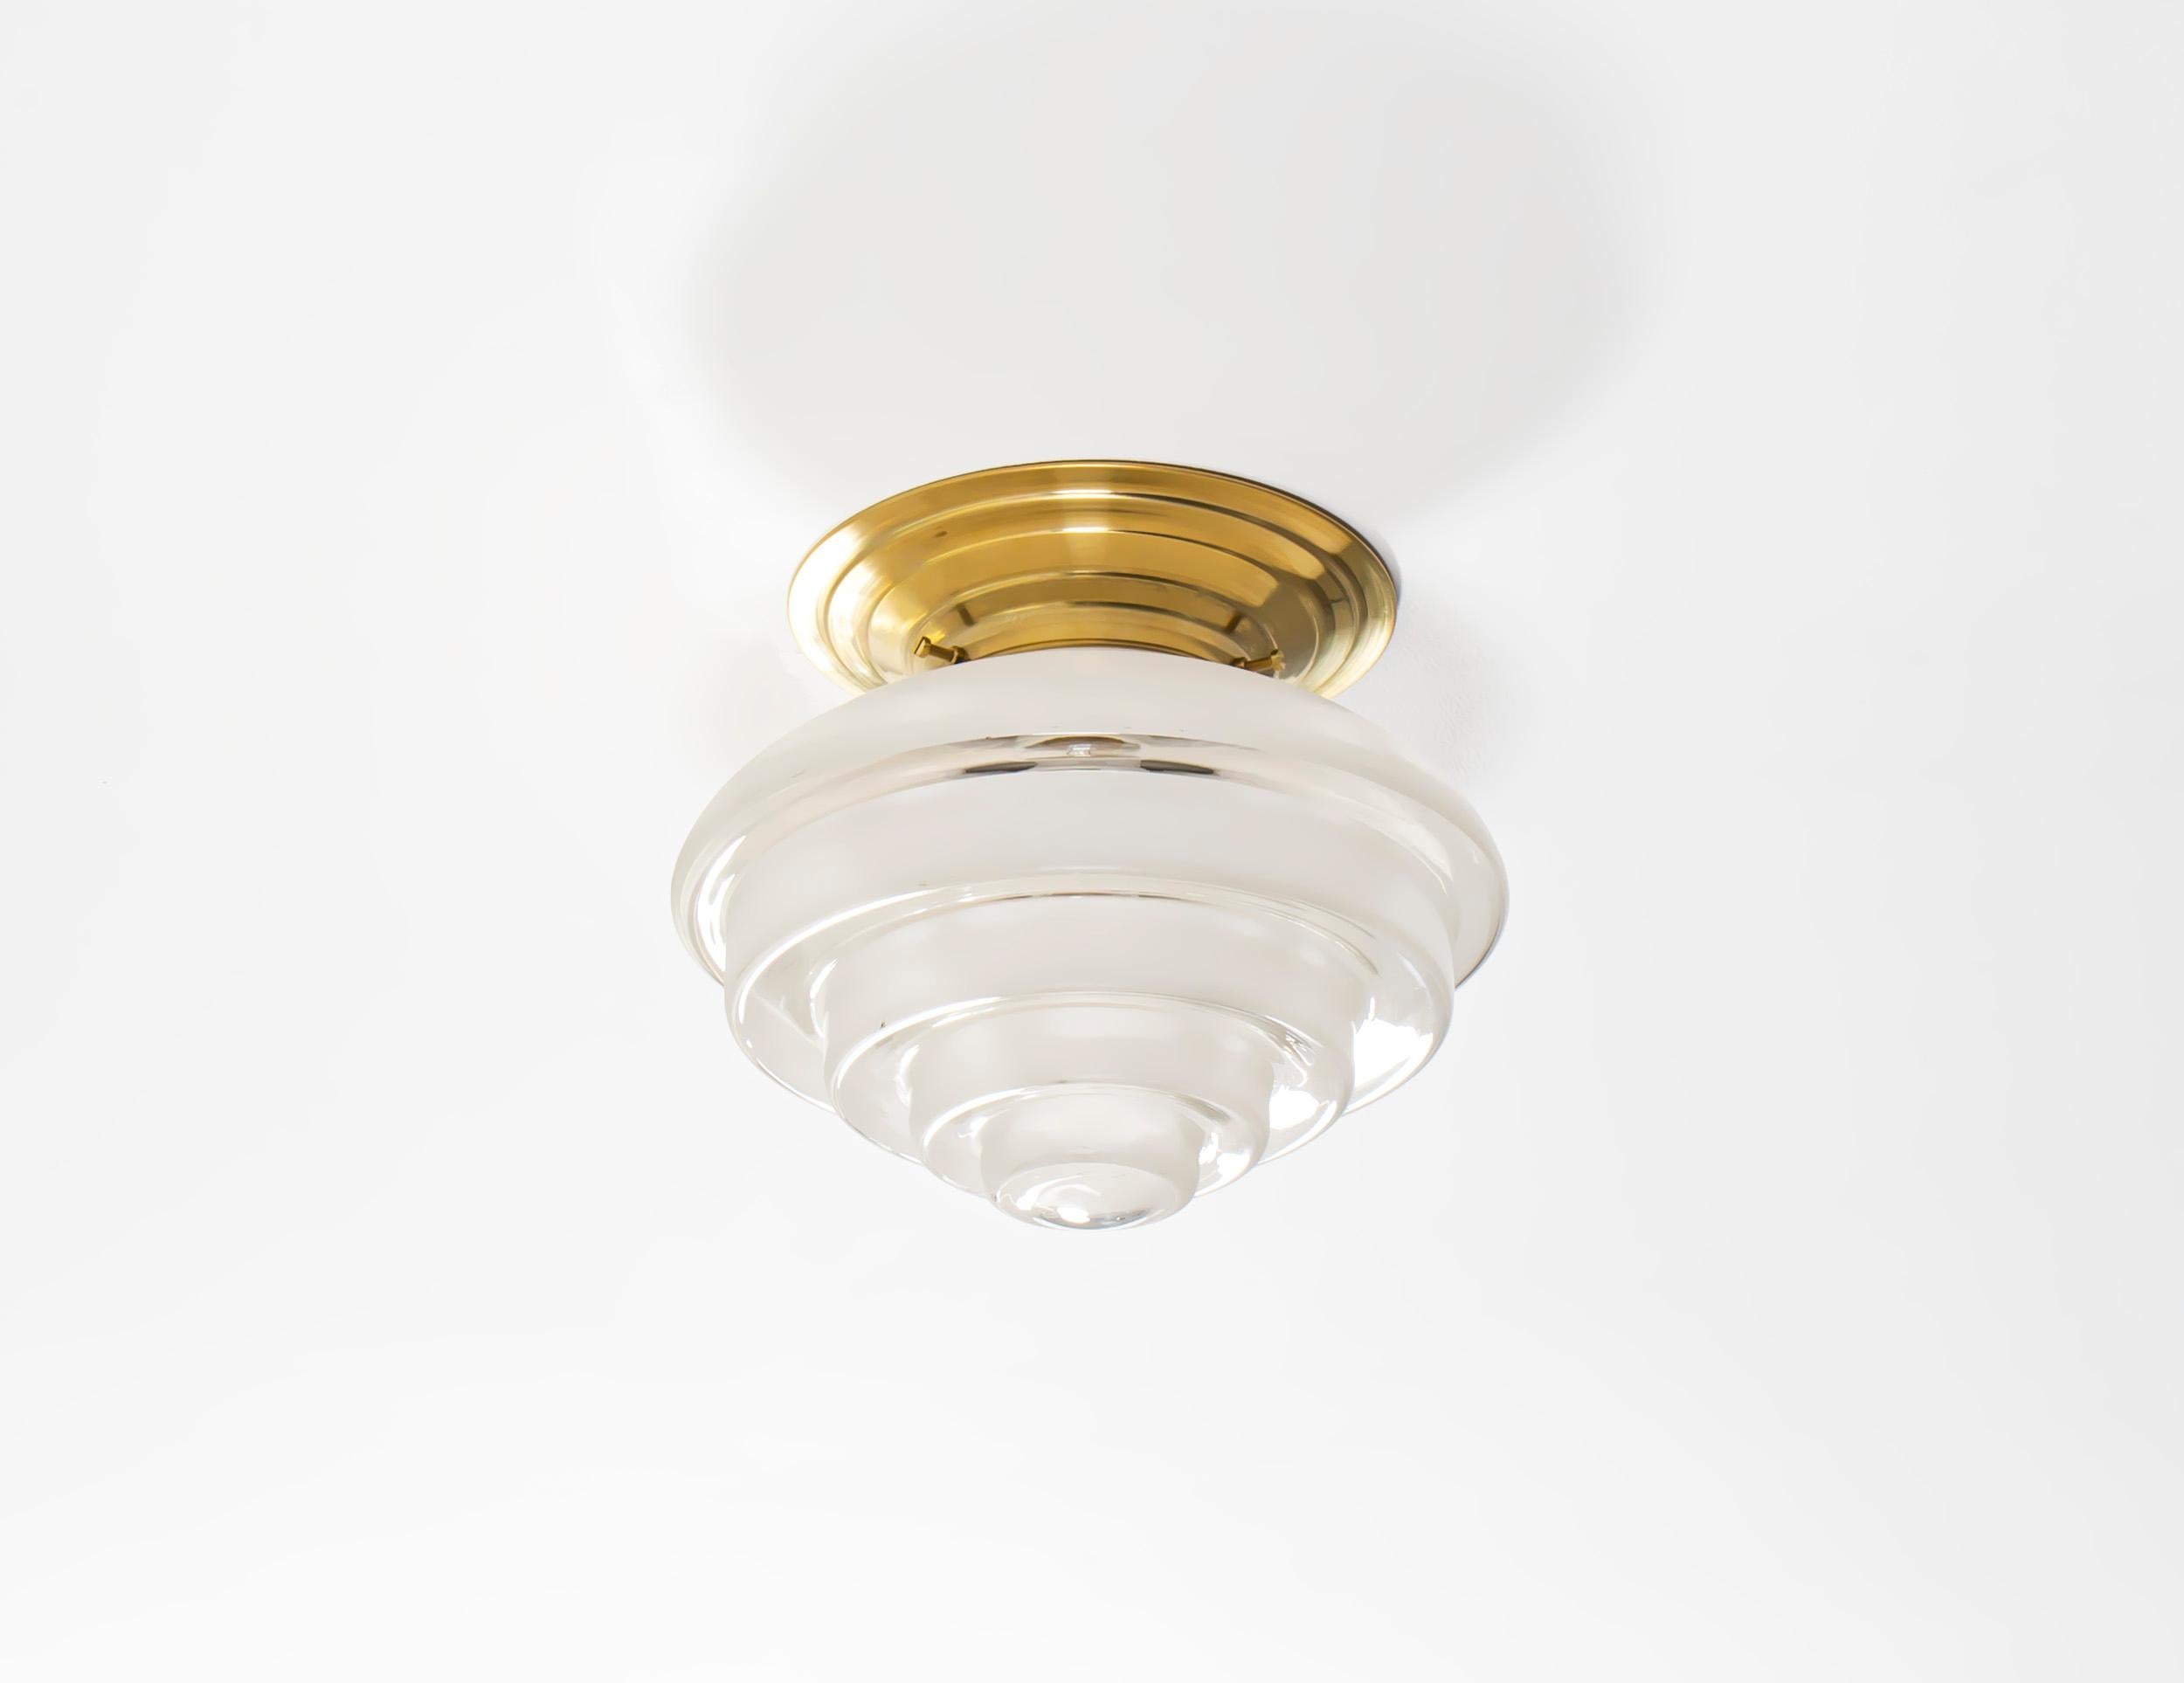 Wonderful and decorative ceiling light in glass with brass metal base. Designed and made in Norway from ca 1950s first half. The lamp is fully working and in very good vintage condition. It is fitted with one E27 bulb holder (works in the US) and